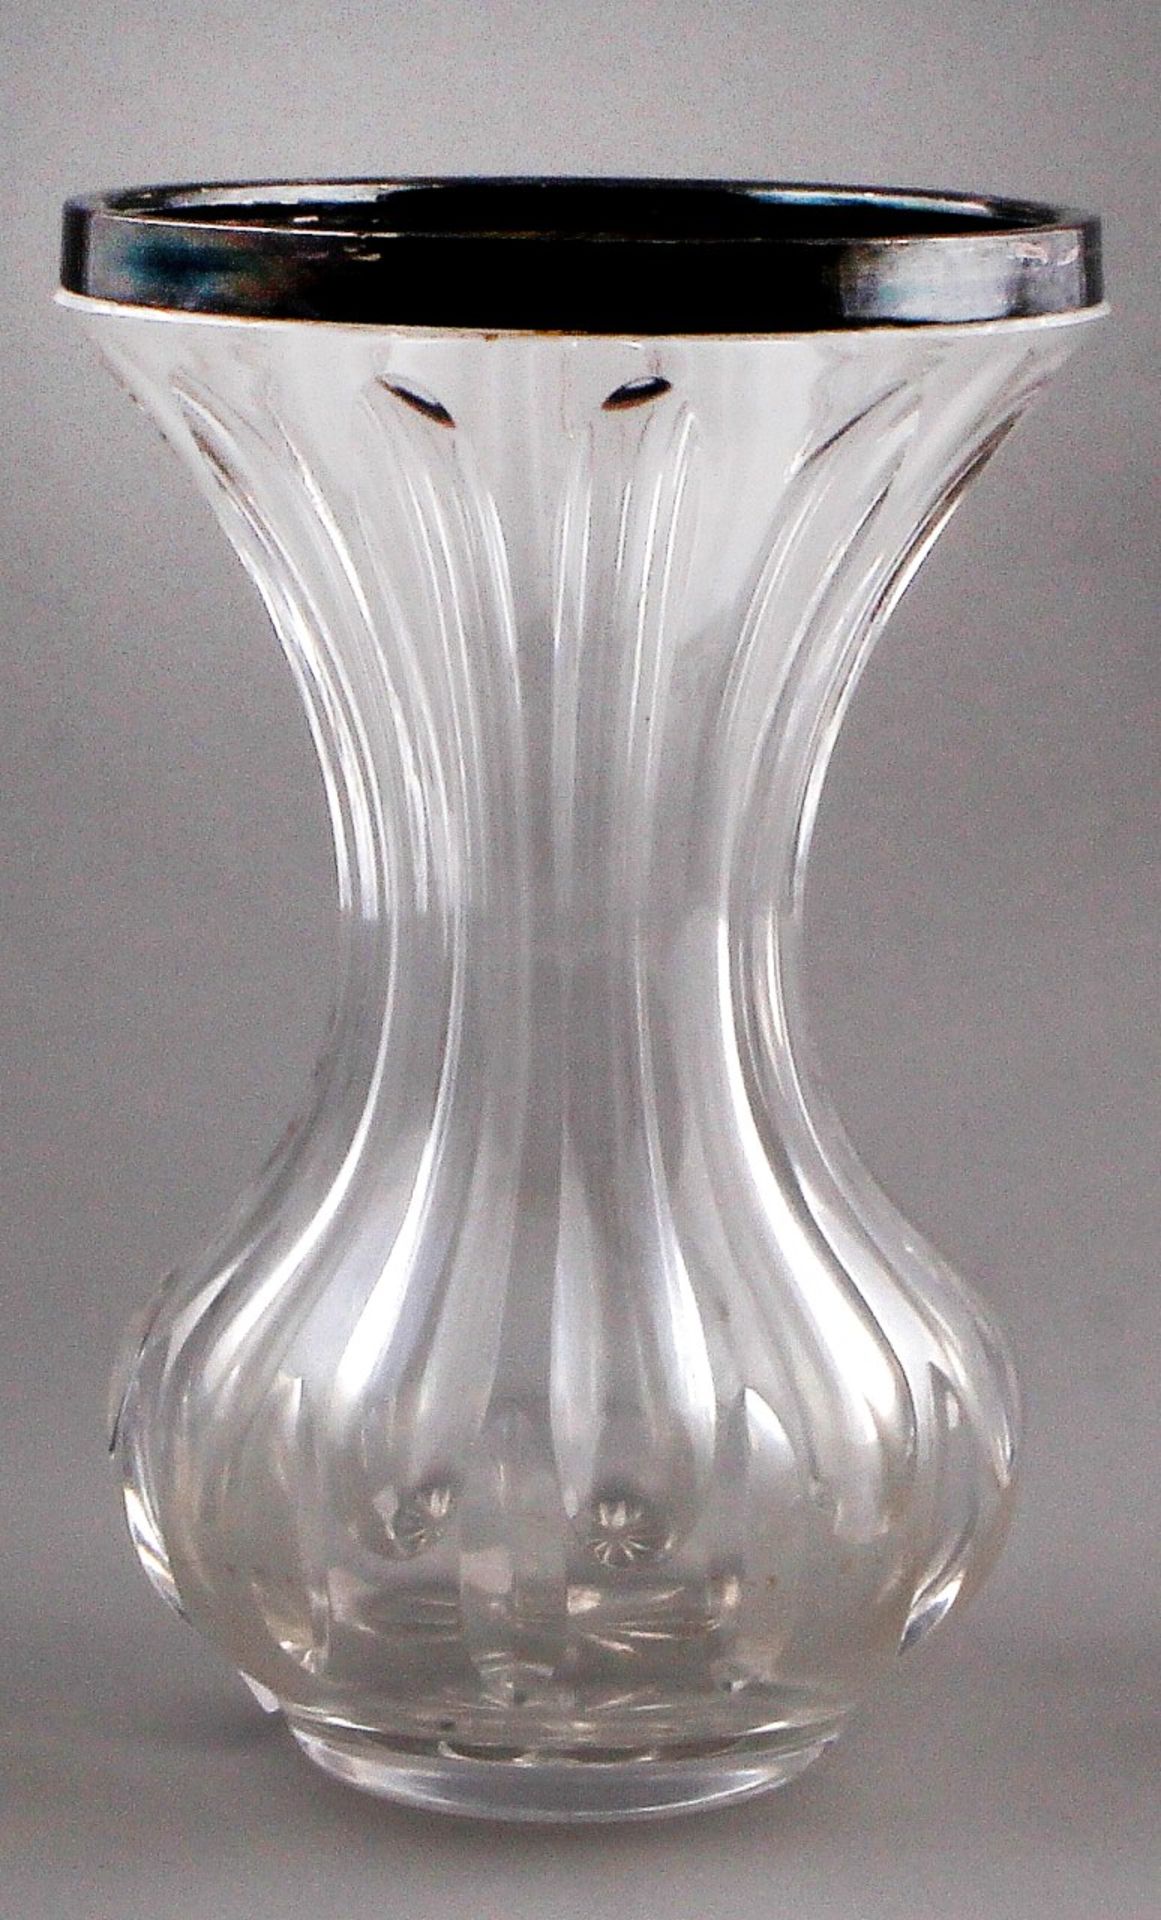 Crystal vase with silver border, 925/000, German. Crystal vase with bulging belly and flared rim